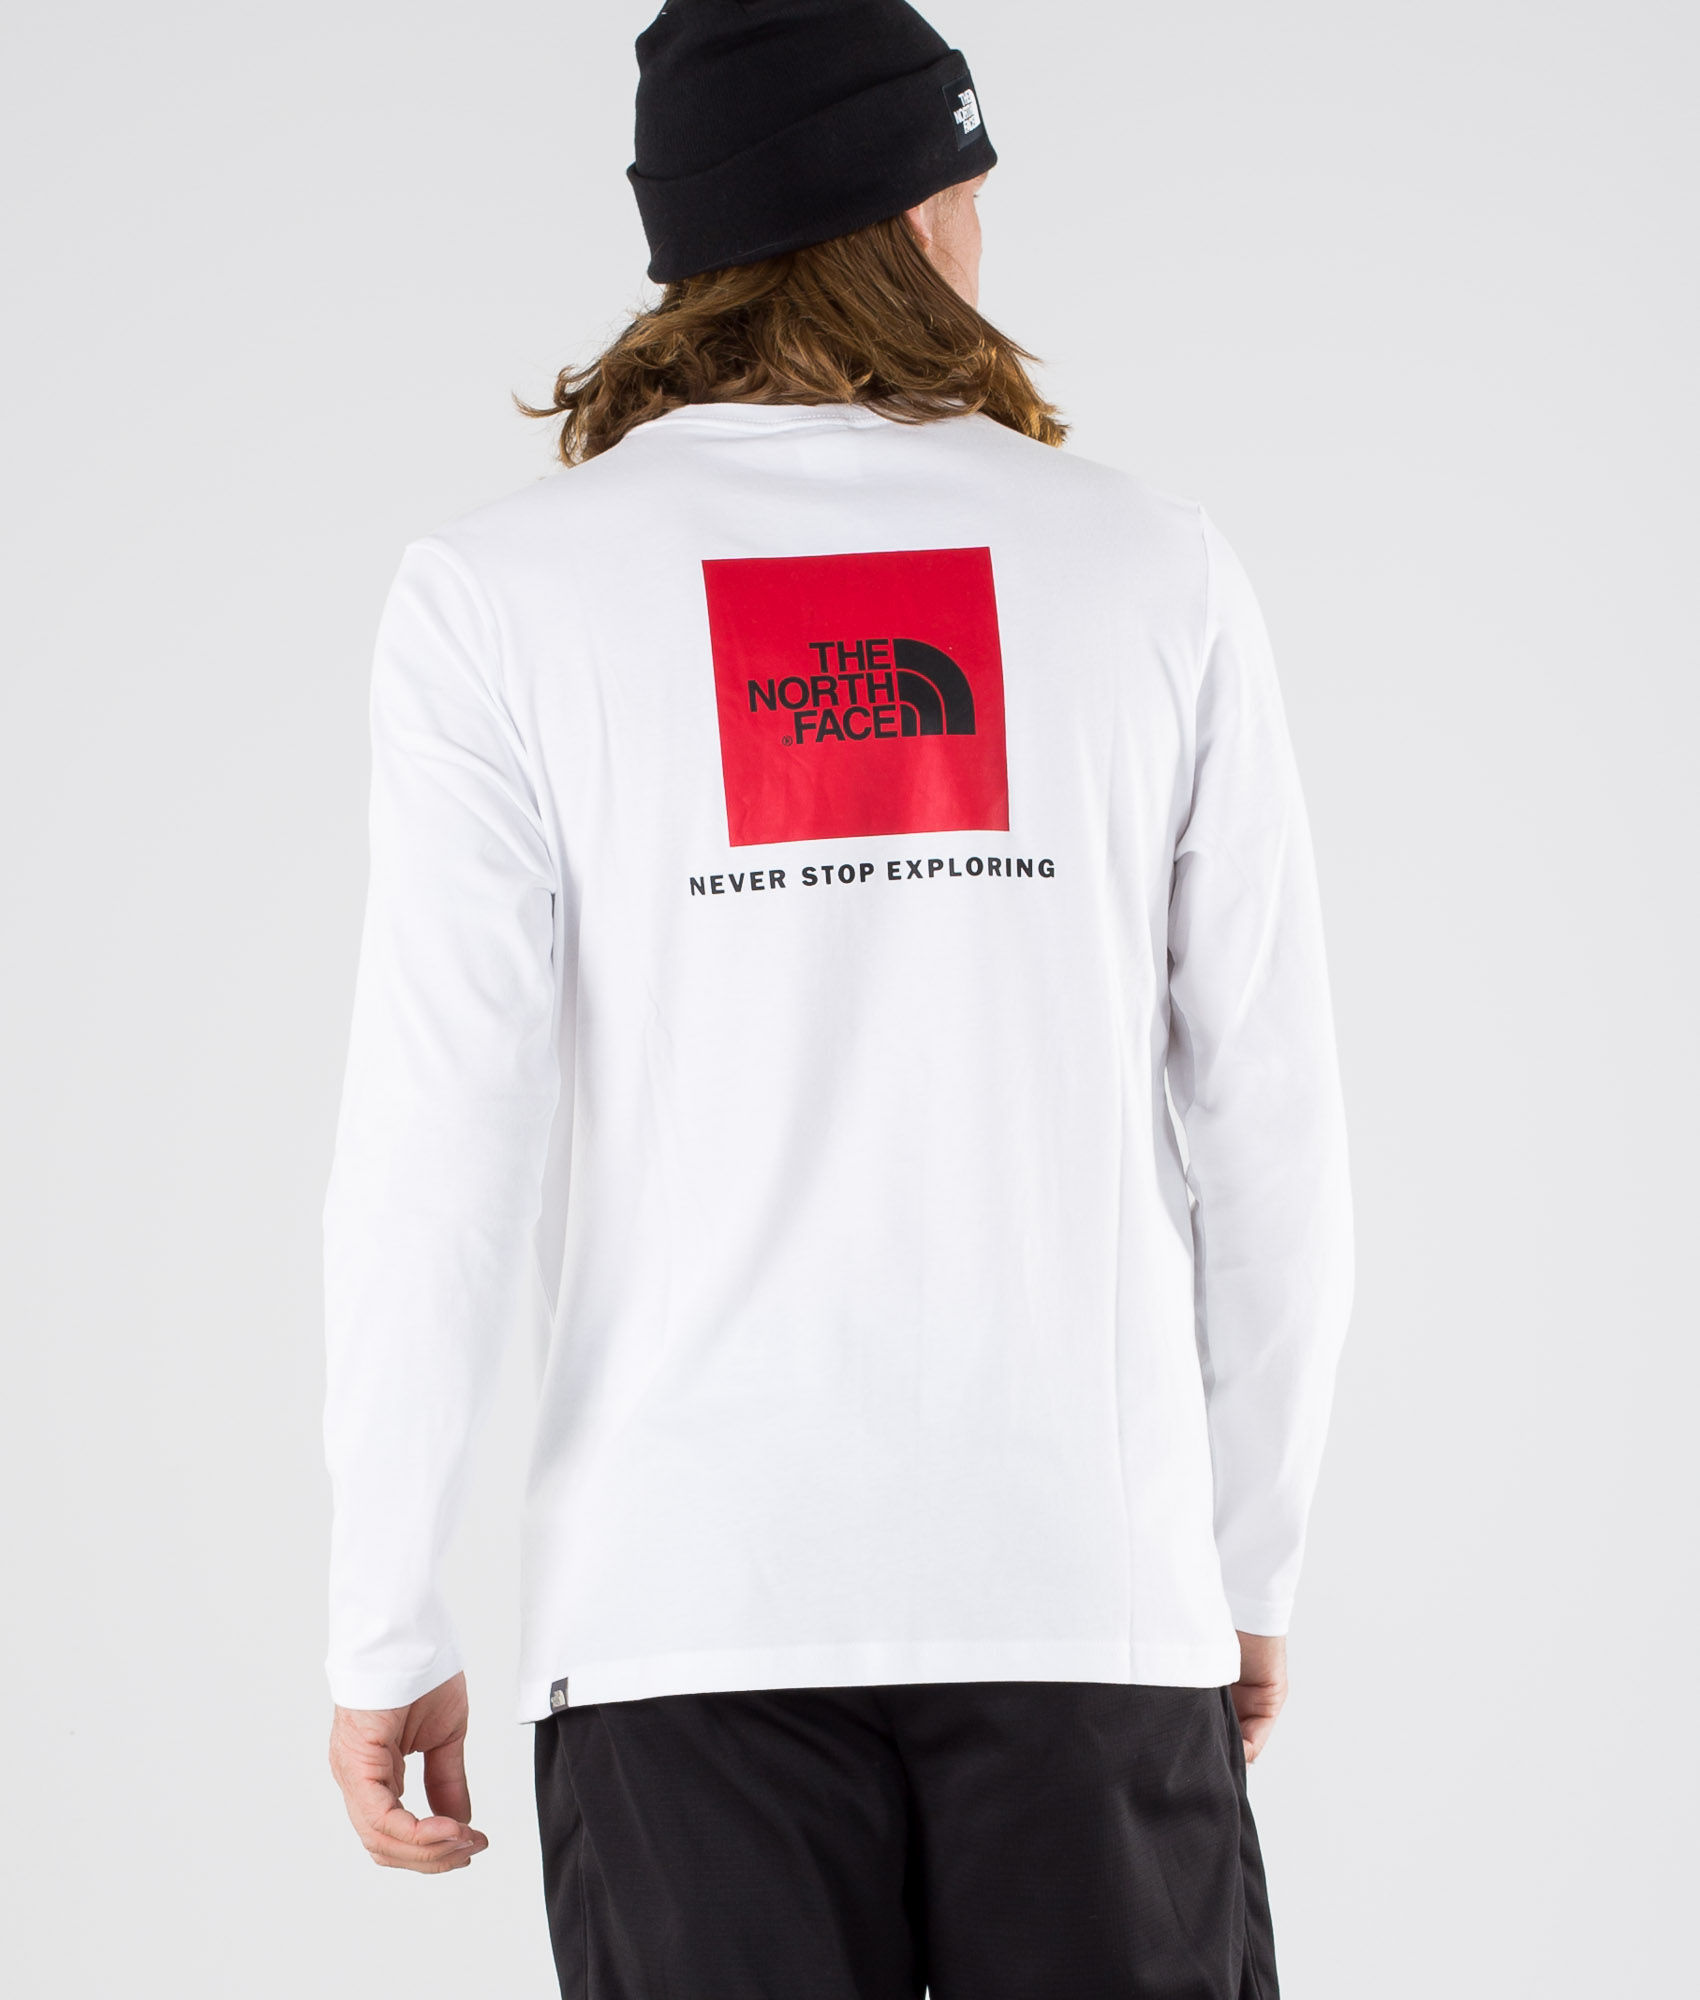 north face white long sleeve